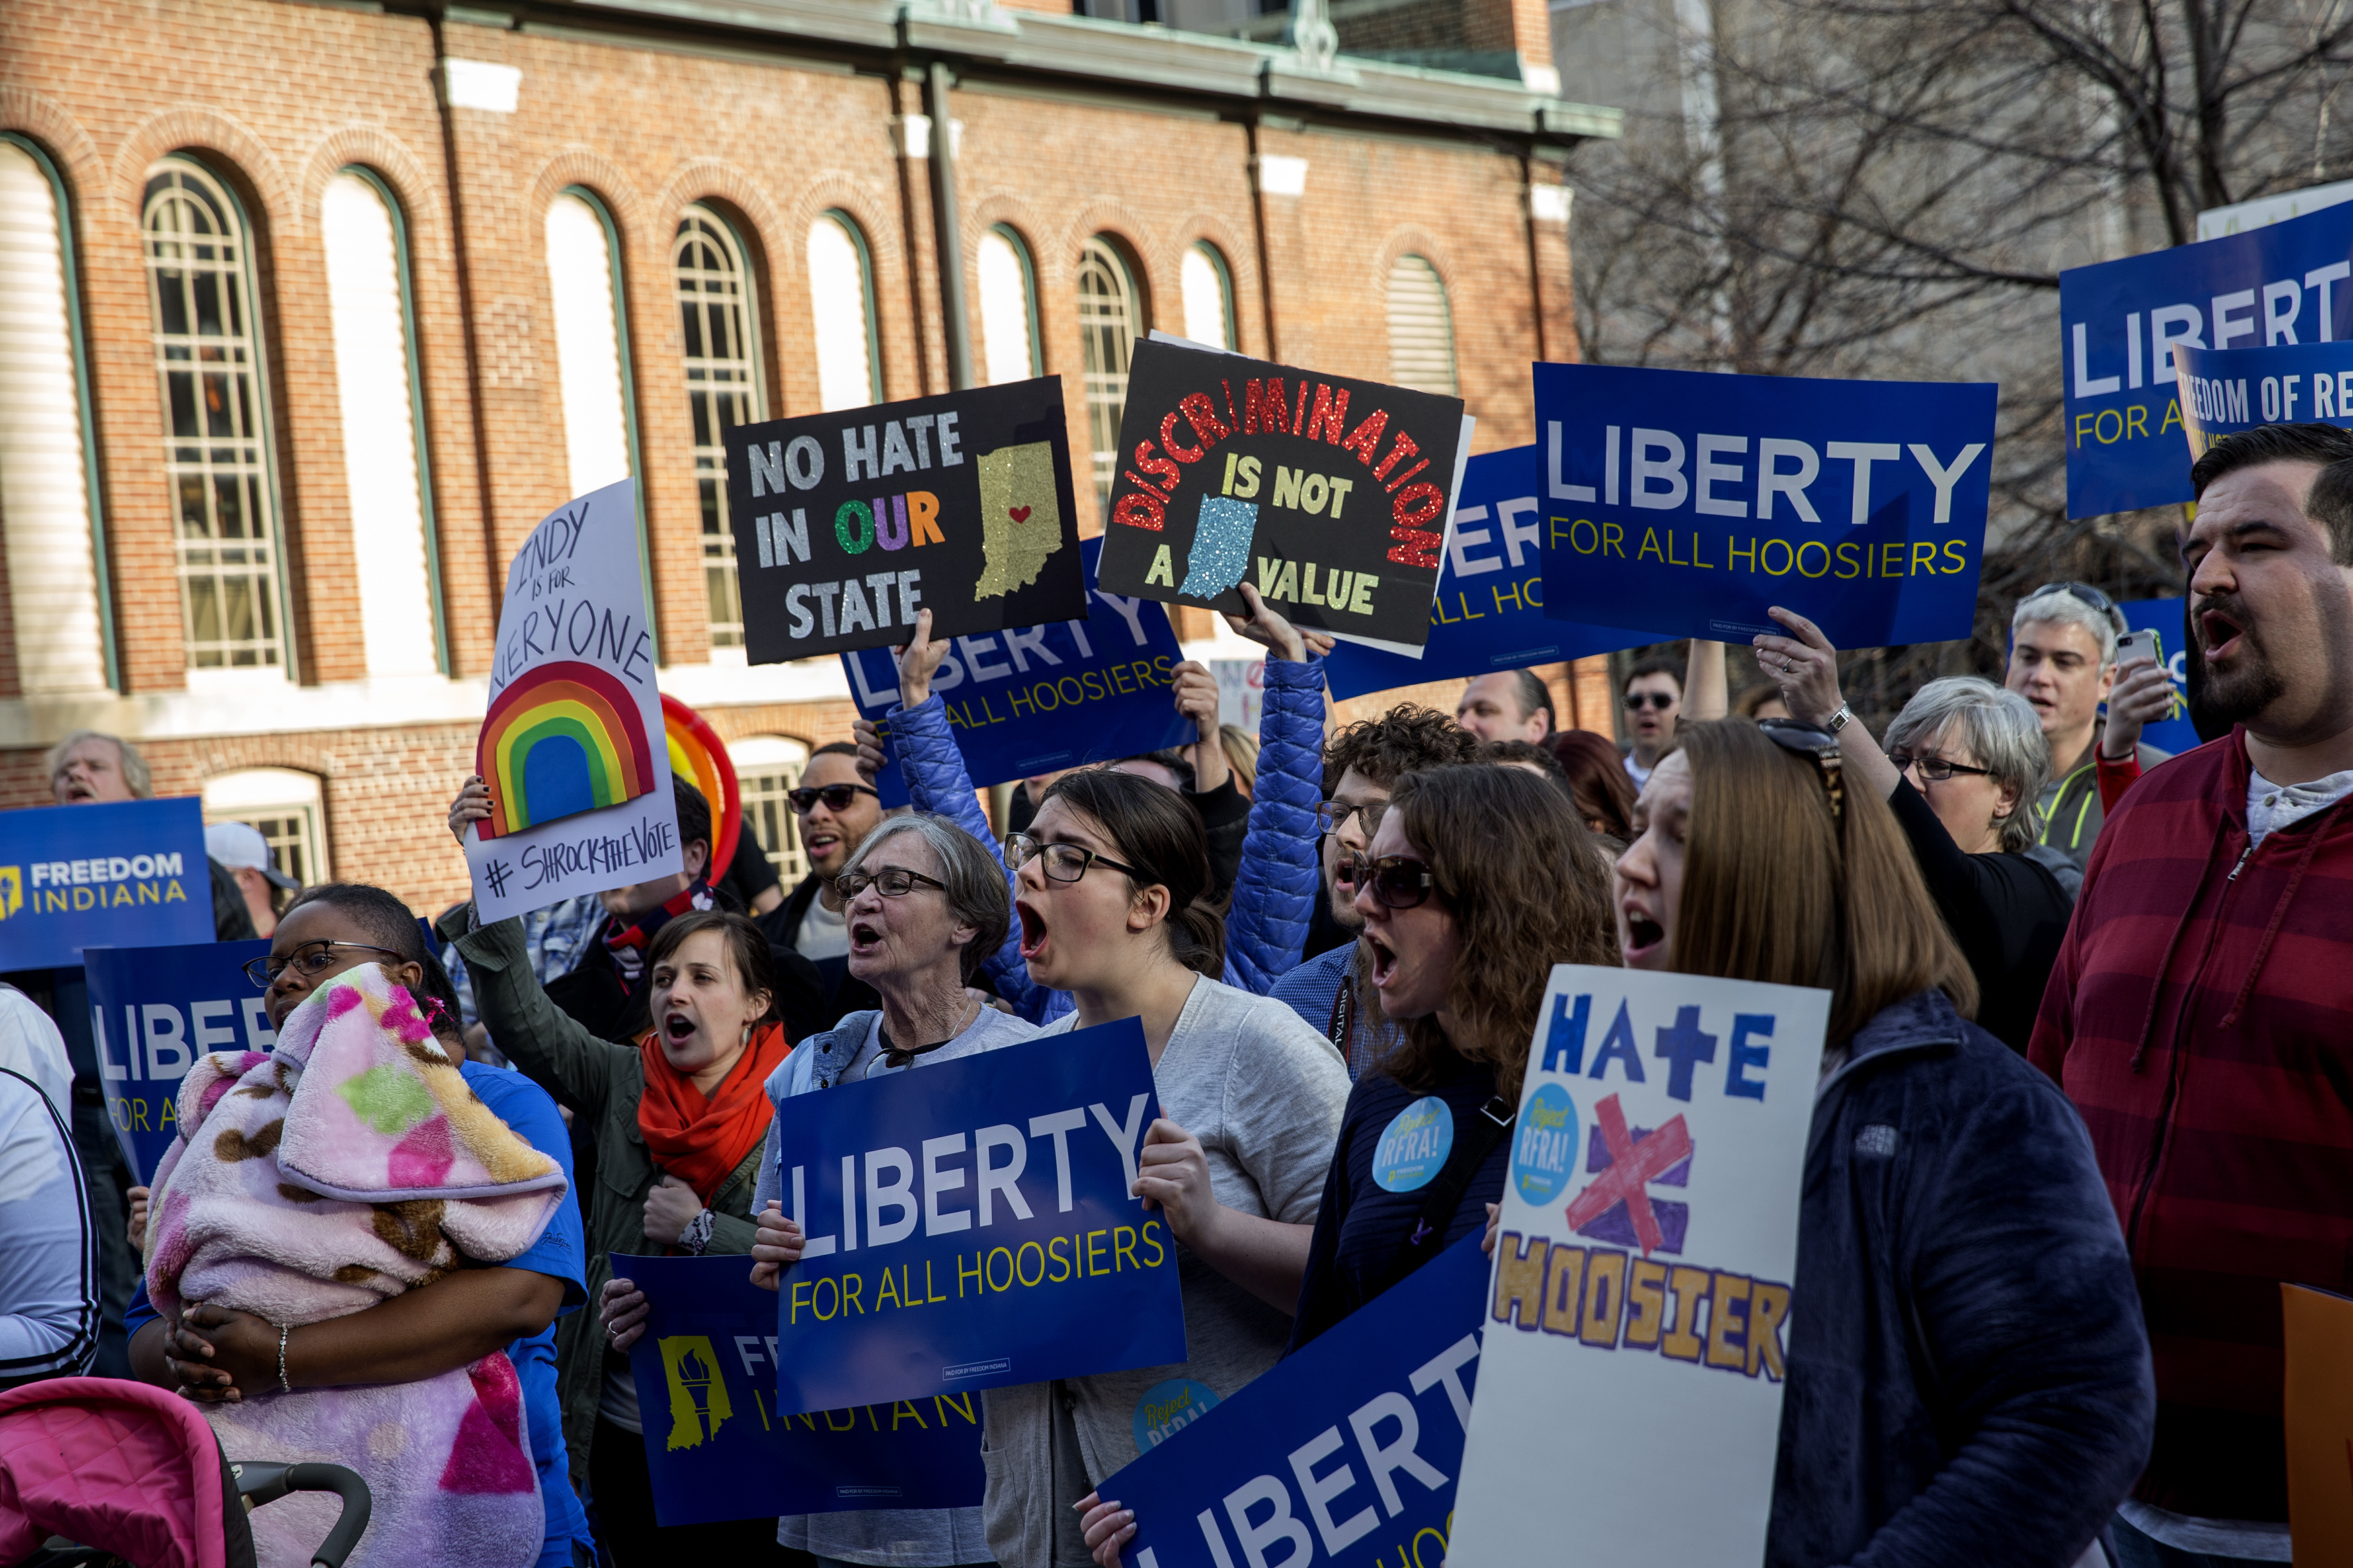 Demonstrators  gather outside the City County Building on March 30, 2015 in Indianapolis, Indiana. The group called on the state house to roll back the controversial Religious Freedom Restoration Act. (Getty)